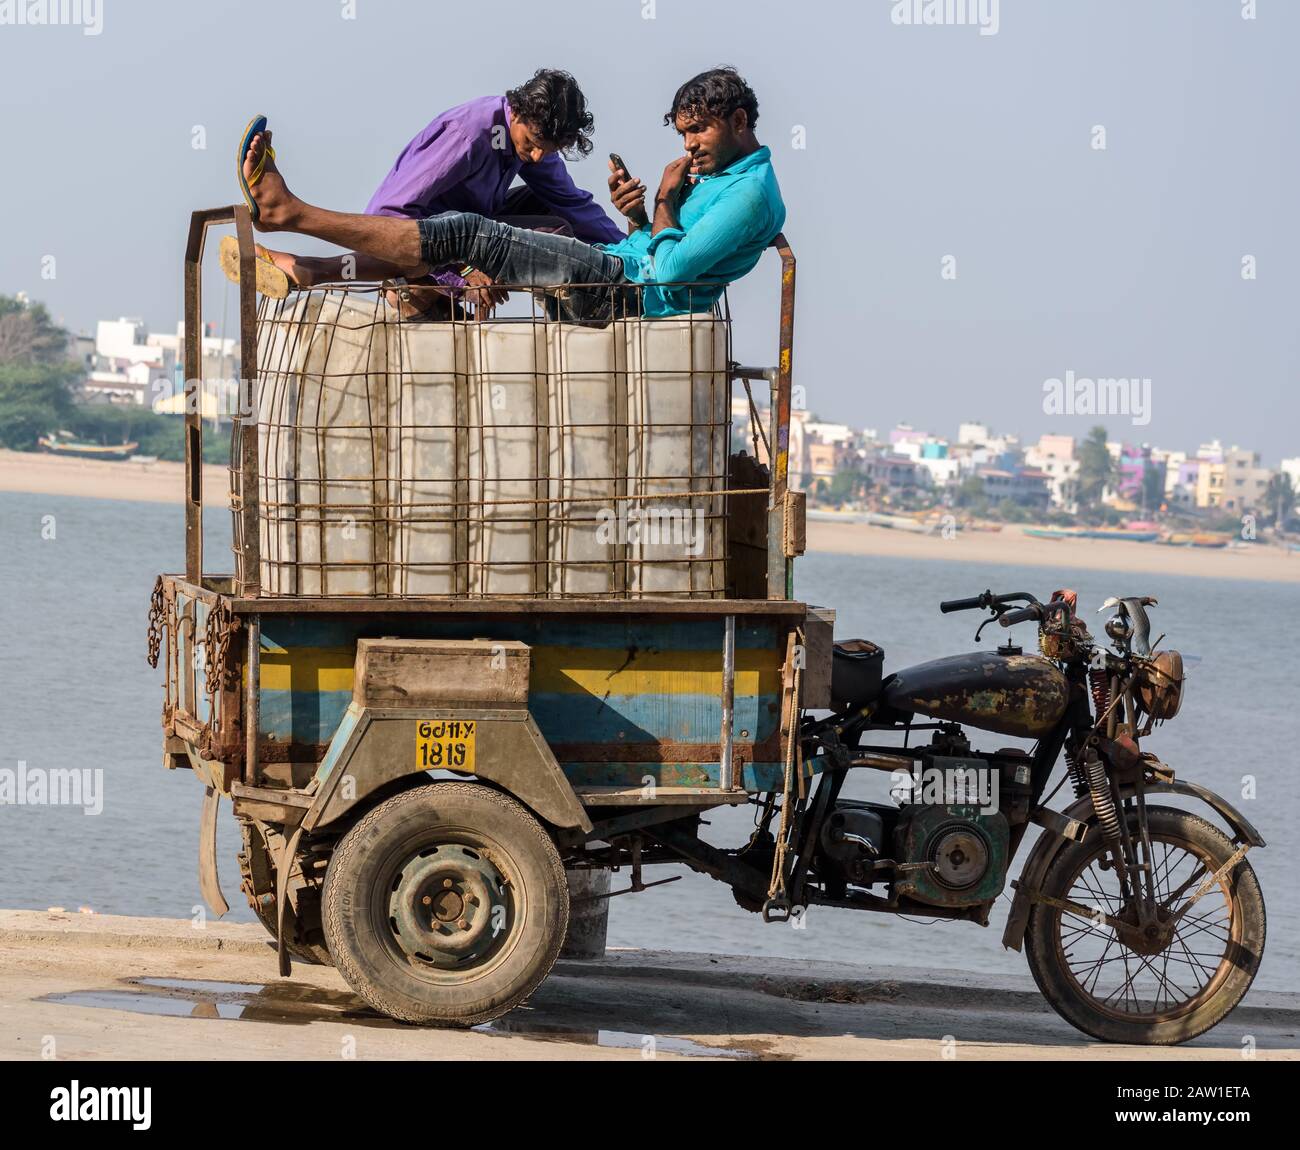 Diu, India - December 2018: Two fishermen relax on top of ice boxes loaded on a three wheeler vehicle by a pier on the island of Diu. Stock Photo